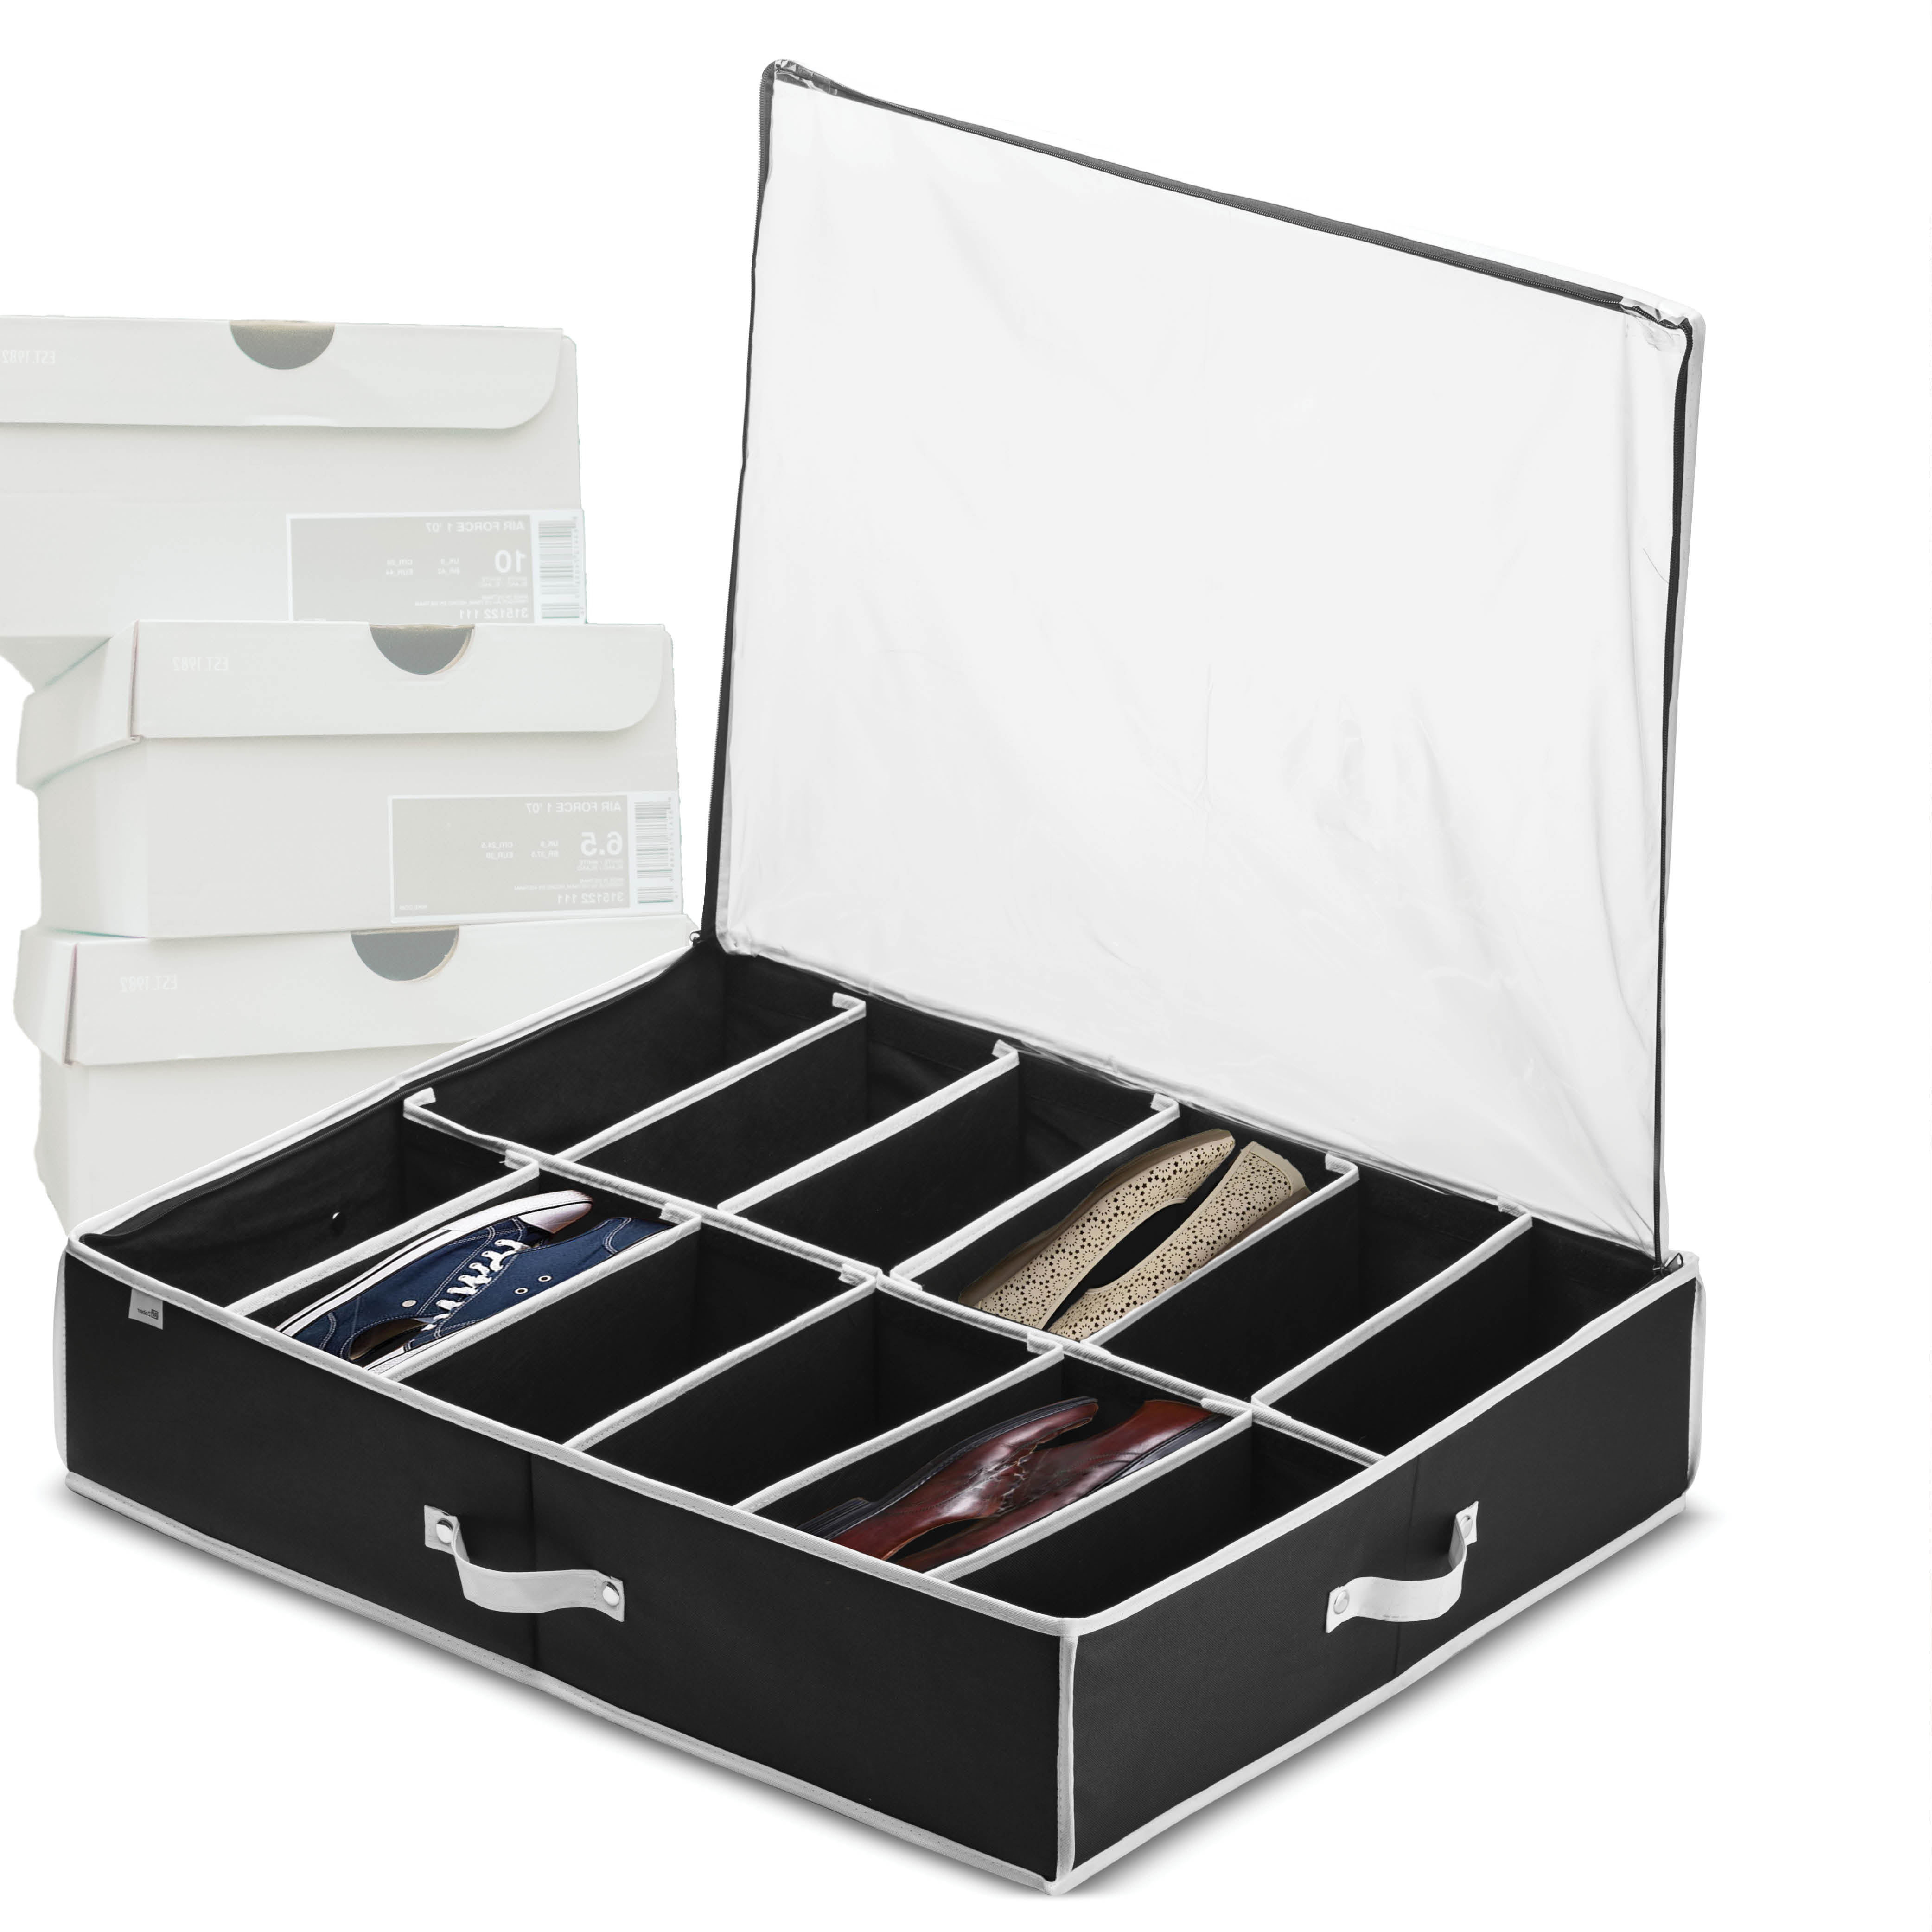 Rigid Underbed Shoe Storage Box with Adjustable Dividers (fits up to 12